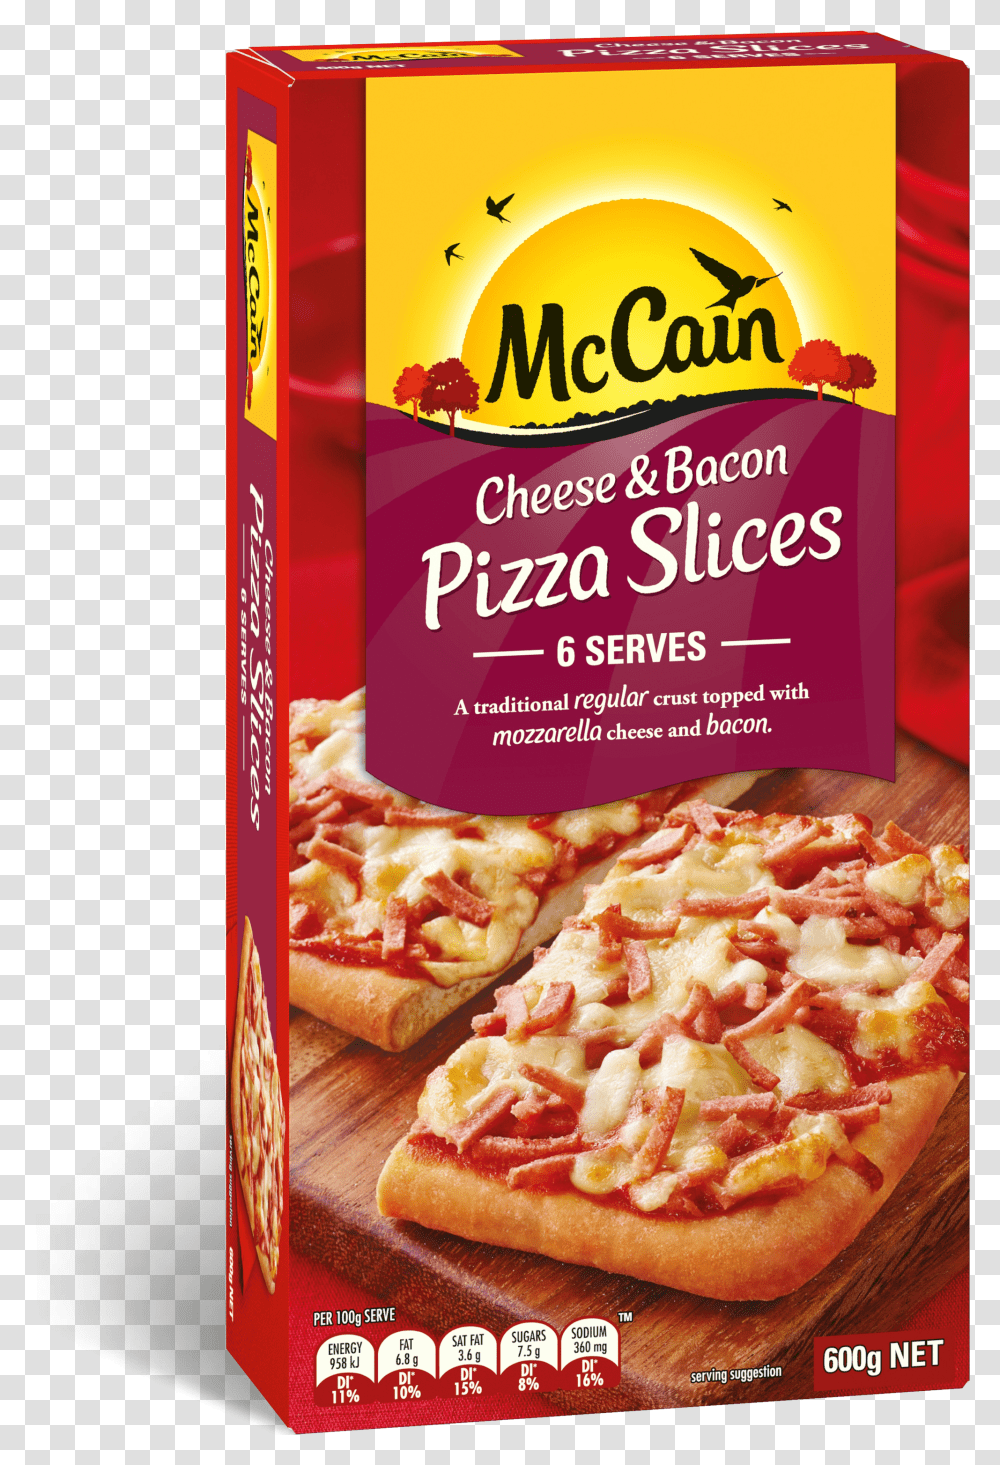 Cheese & Bacon Pizza Slices 600g Mccain Ham And Pineapple Mccain Pizza Slices Transparent Png